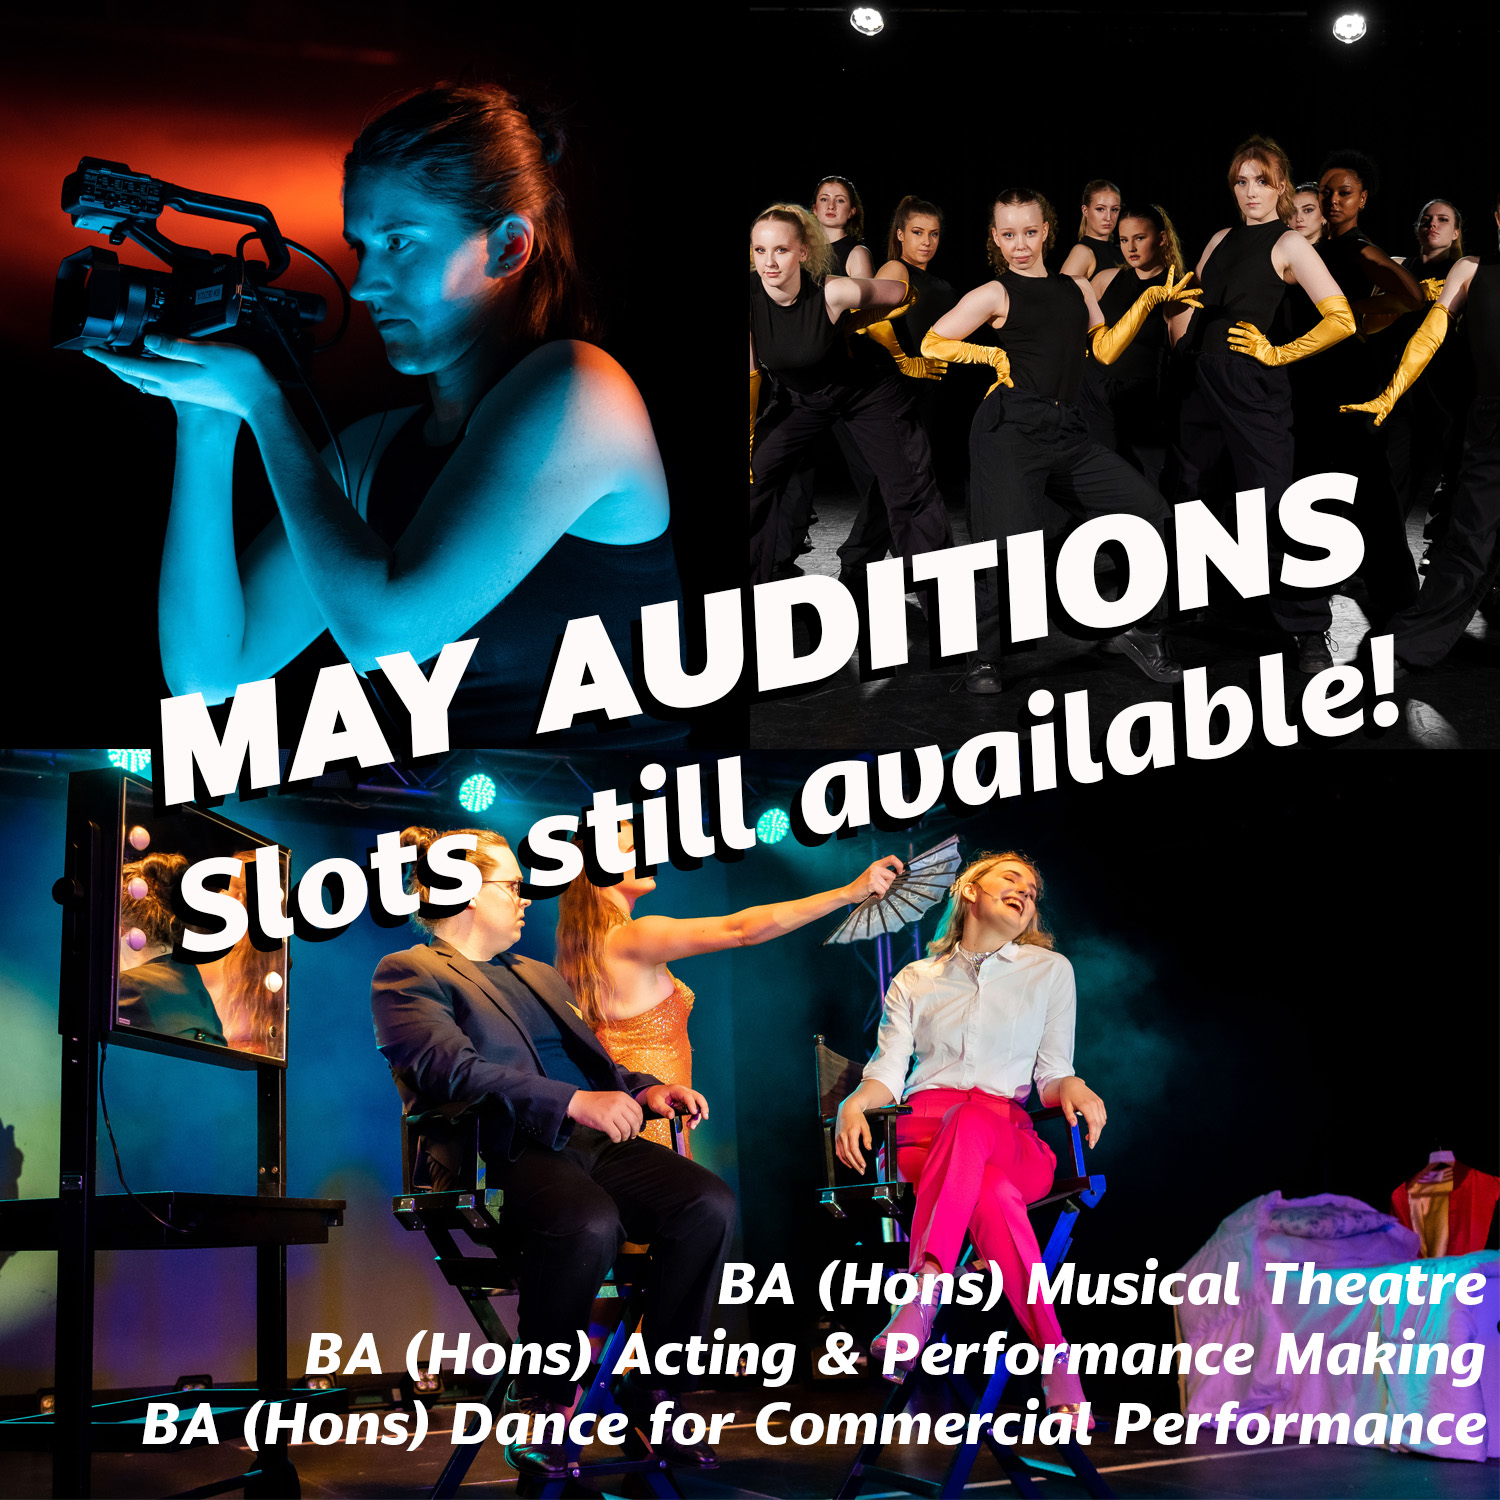 Decorative May auditions poster